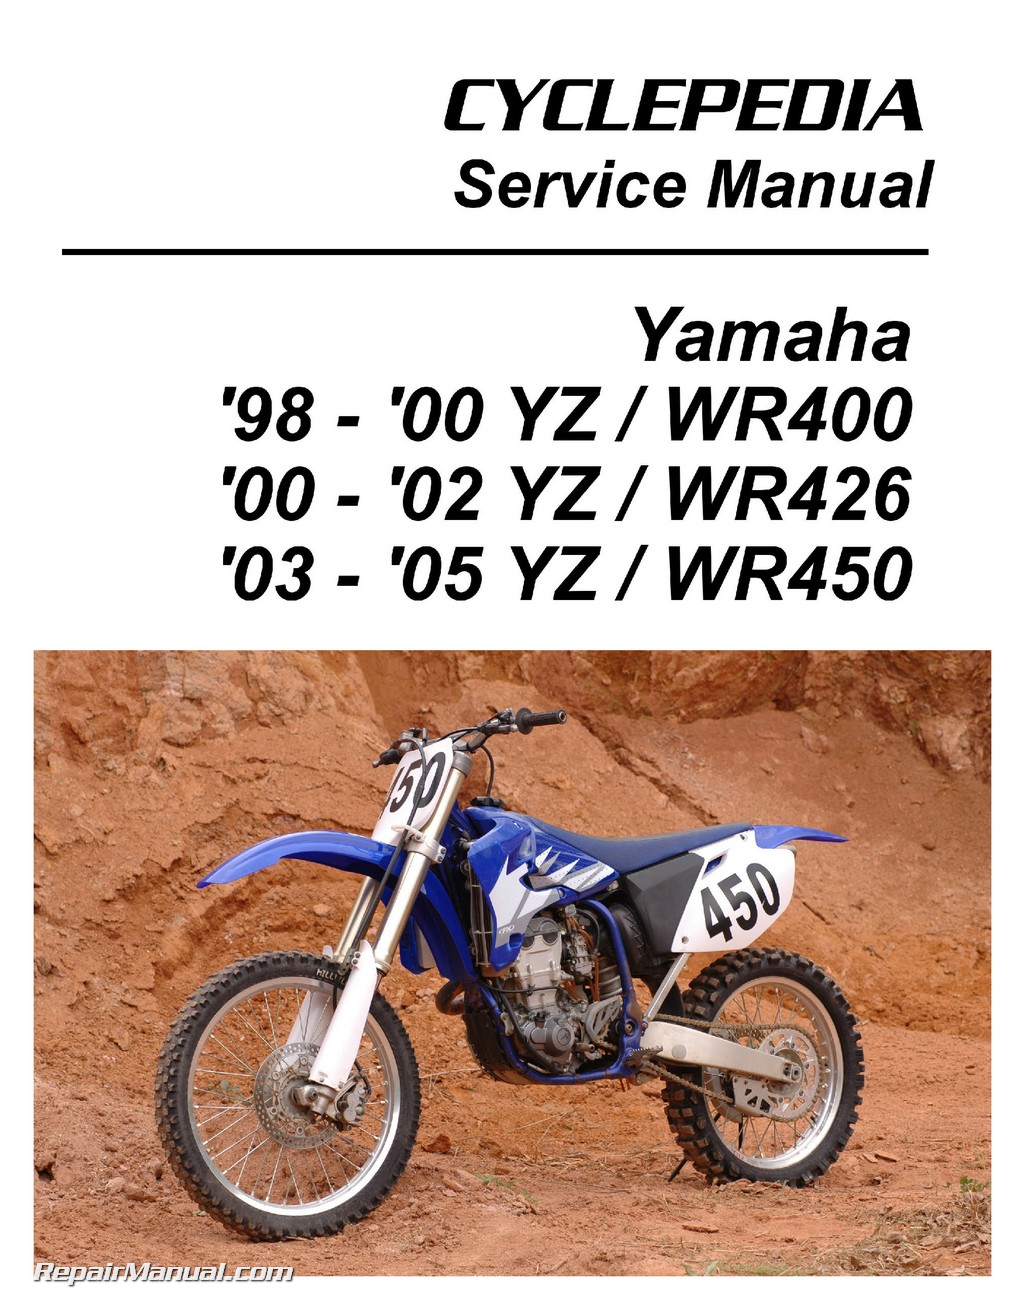 Yz426 service manual download free youtube